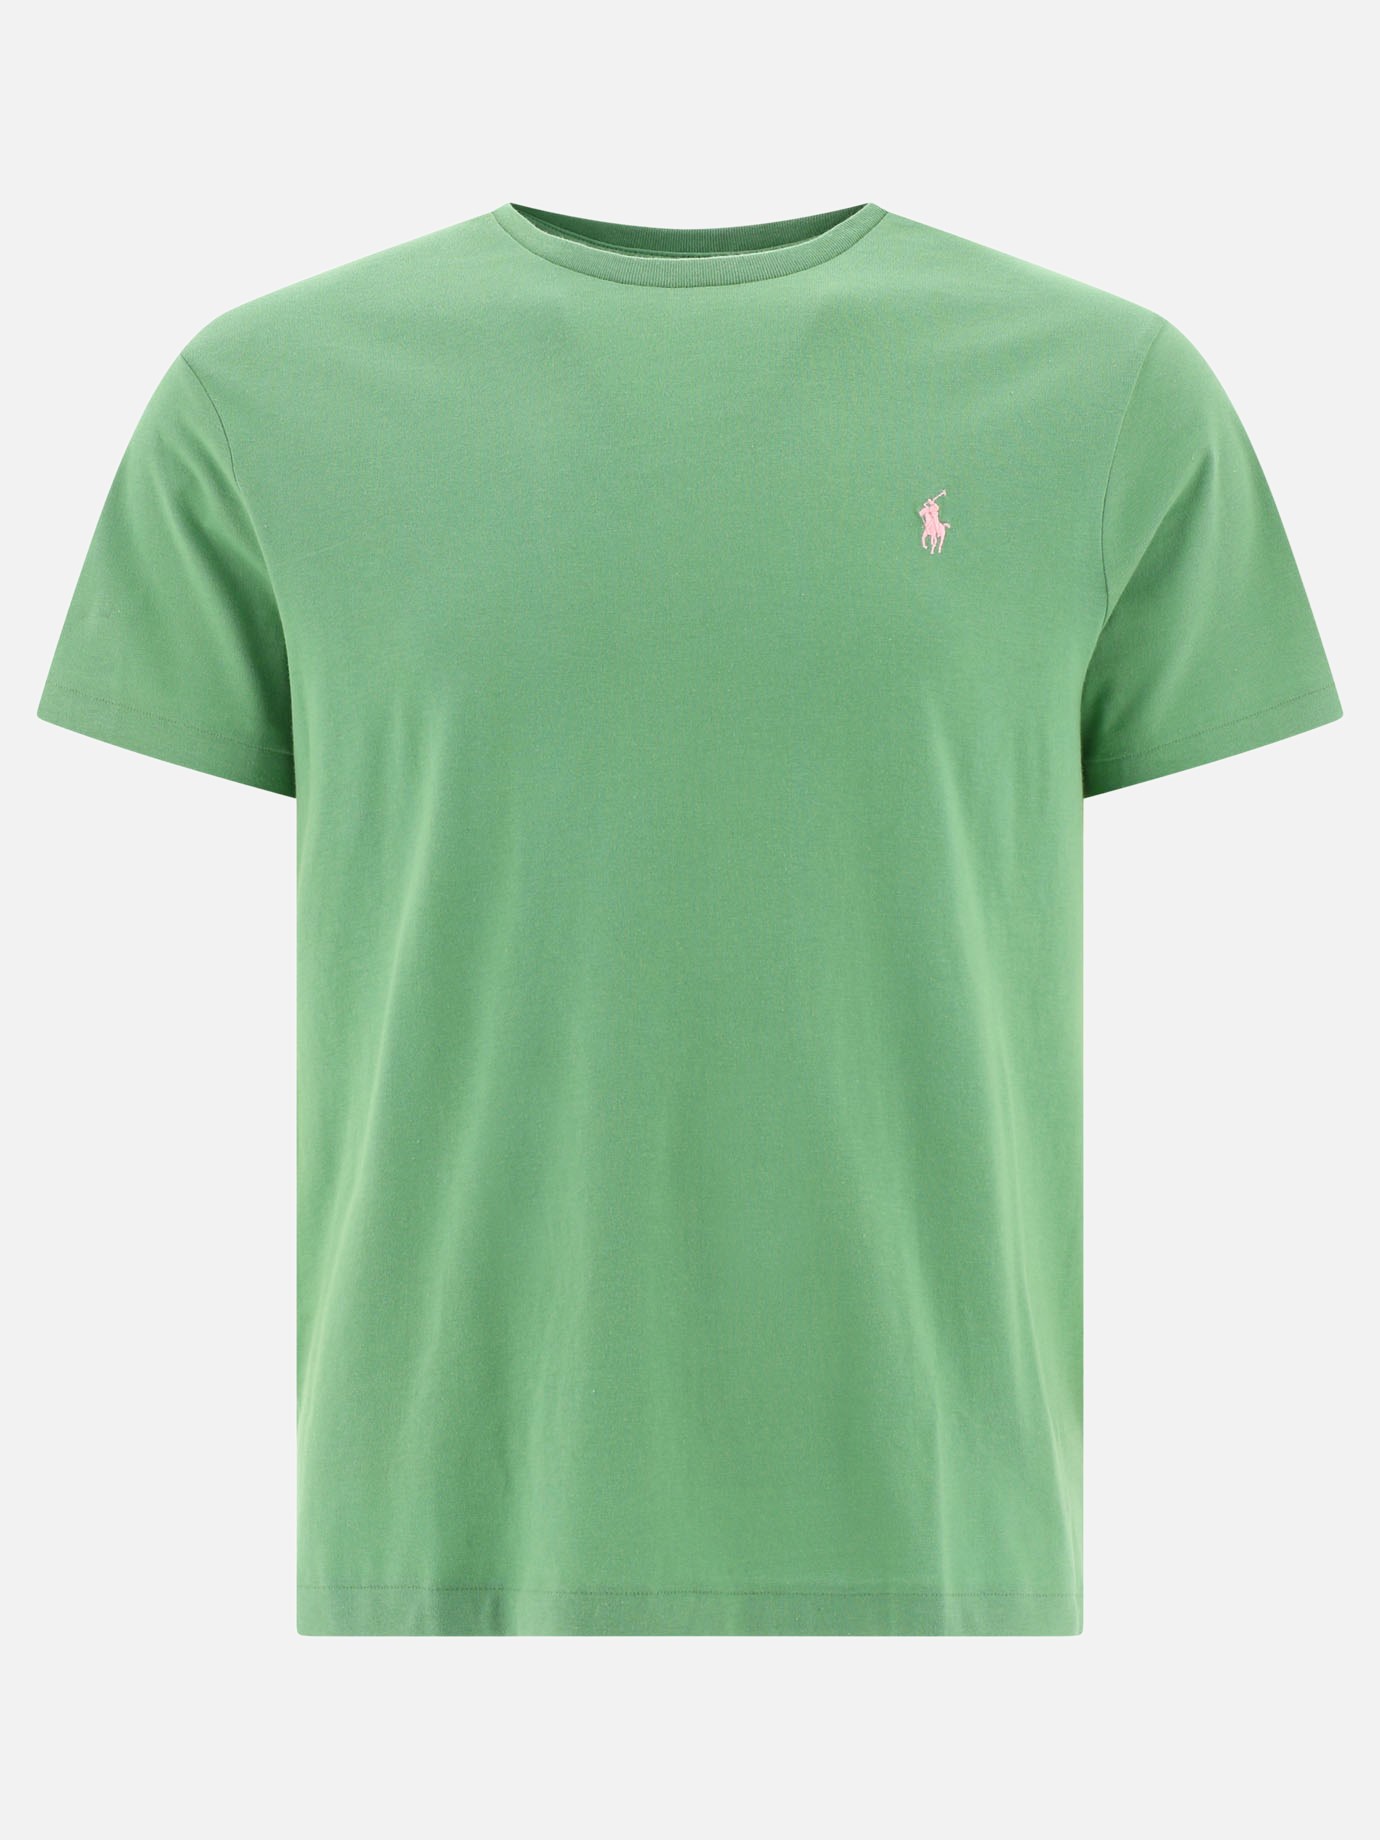  Pony  t-shirt by Polo Ralph Lauren